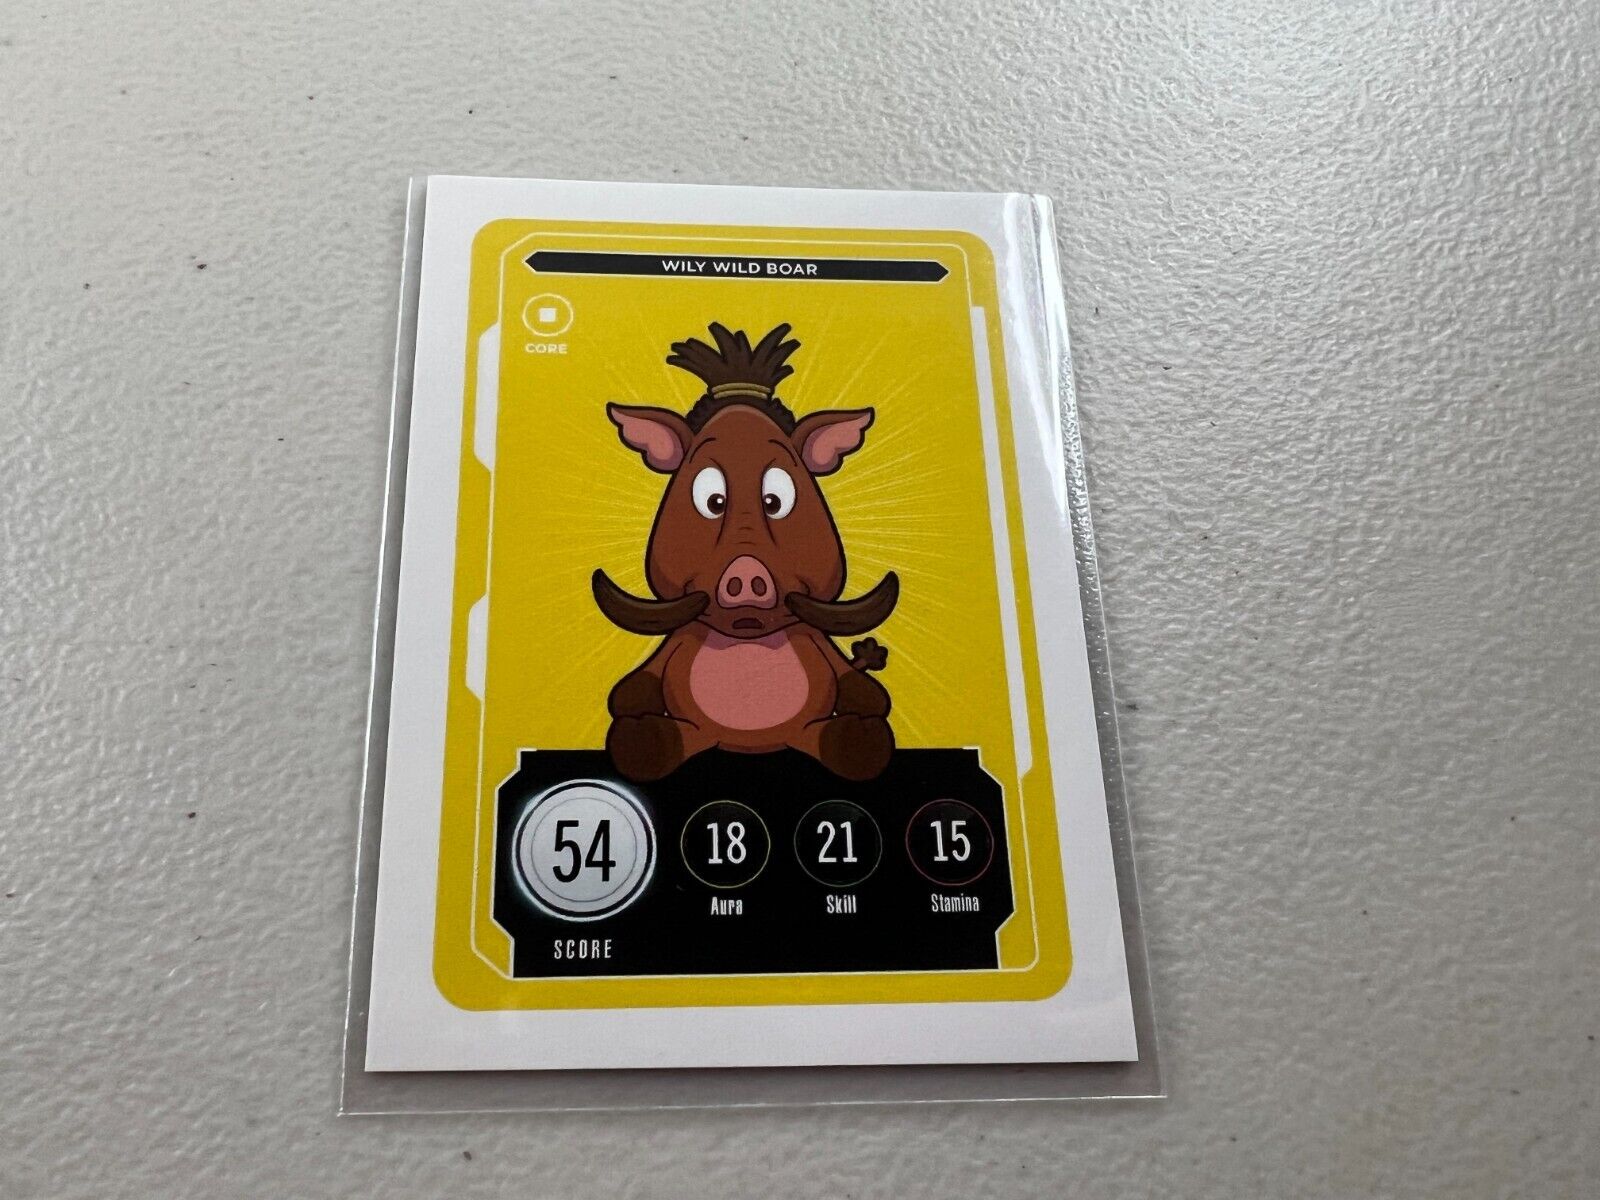 VeeFriends Wily Wild Boar Series 2 Core Card Compete and Collect Gary Vee